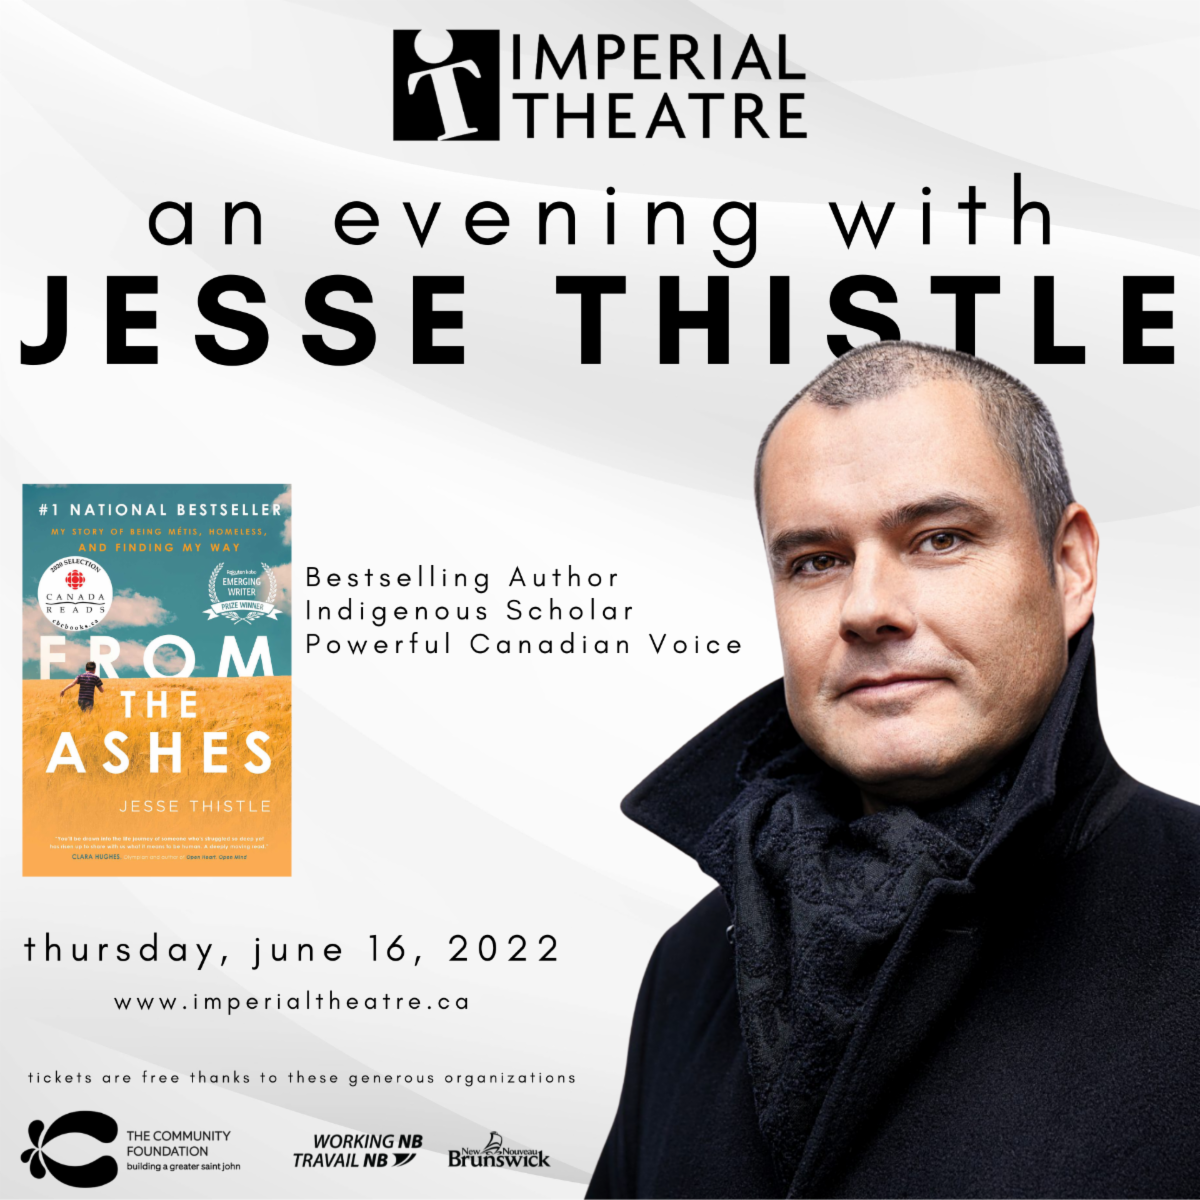 Imperial Theatre, an evening with Jesse Thistle, best selling author of From the Ashes, indigenous scholar, powerful Canadian voice. Thursday, June 16, 2022. www.imperialtheatre.ca Tickets are free thanks to these generous organizations: The Community Foundation, Working NB Travail NB, New Brunswick.